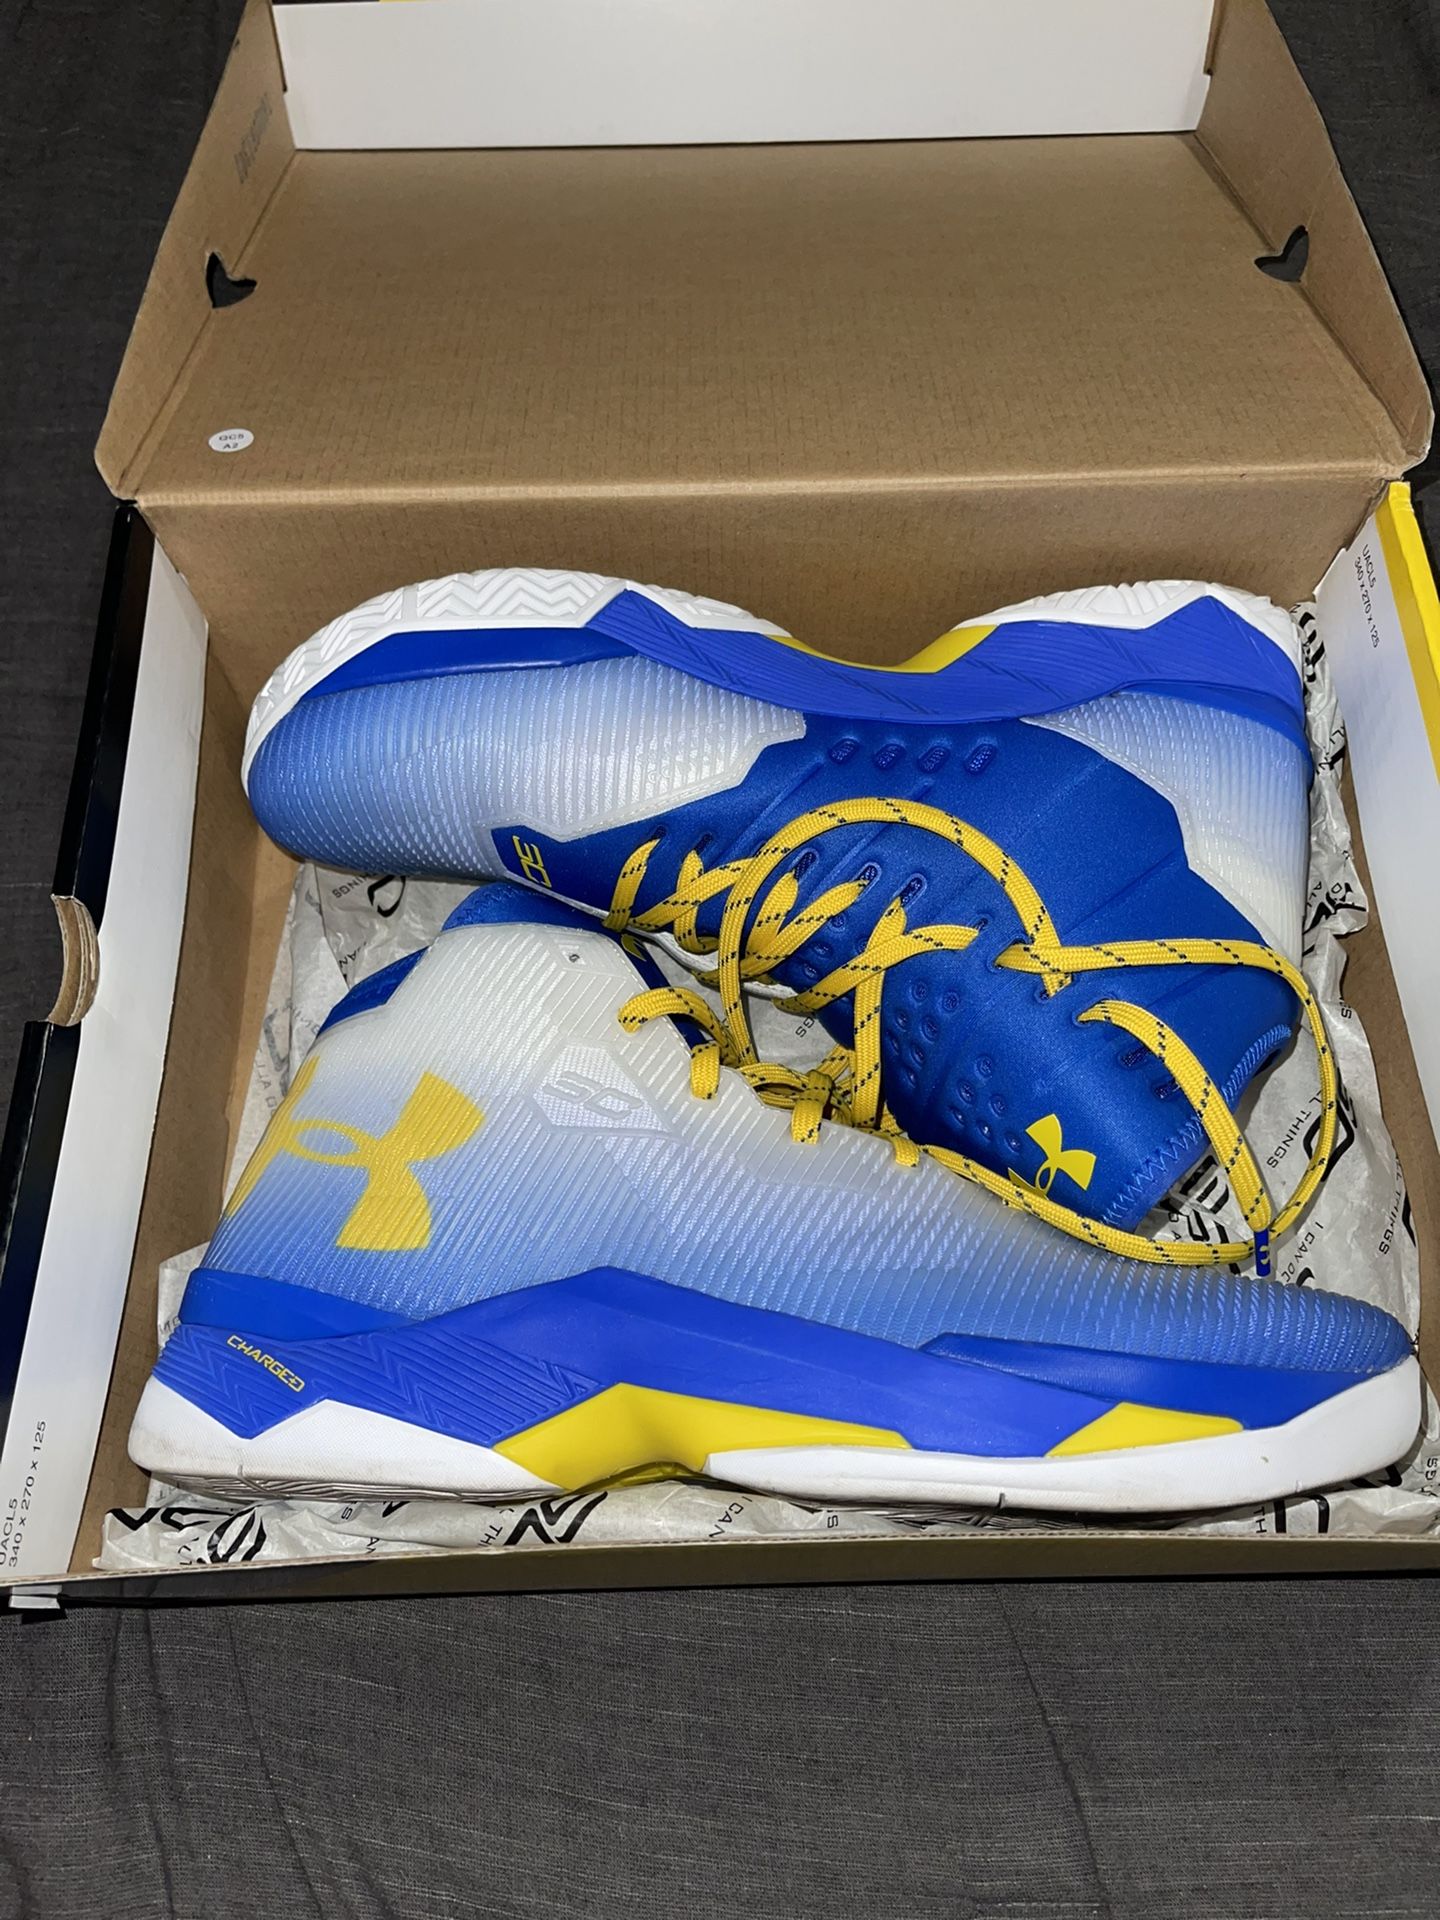 Under Armour Curry 2.5 Basketball Sneakers! 1274425-103 Size 12 Yellow Blue